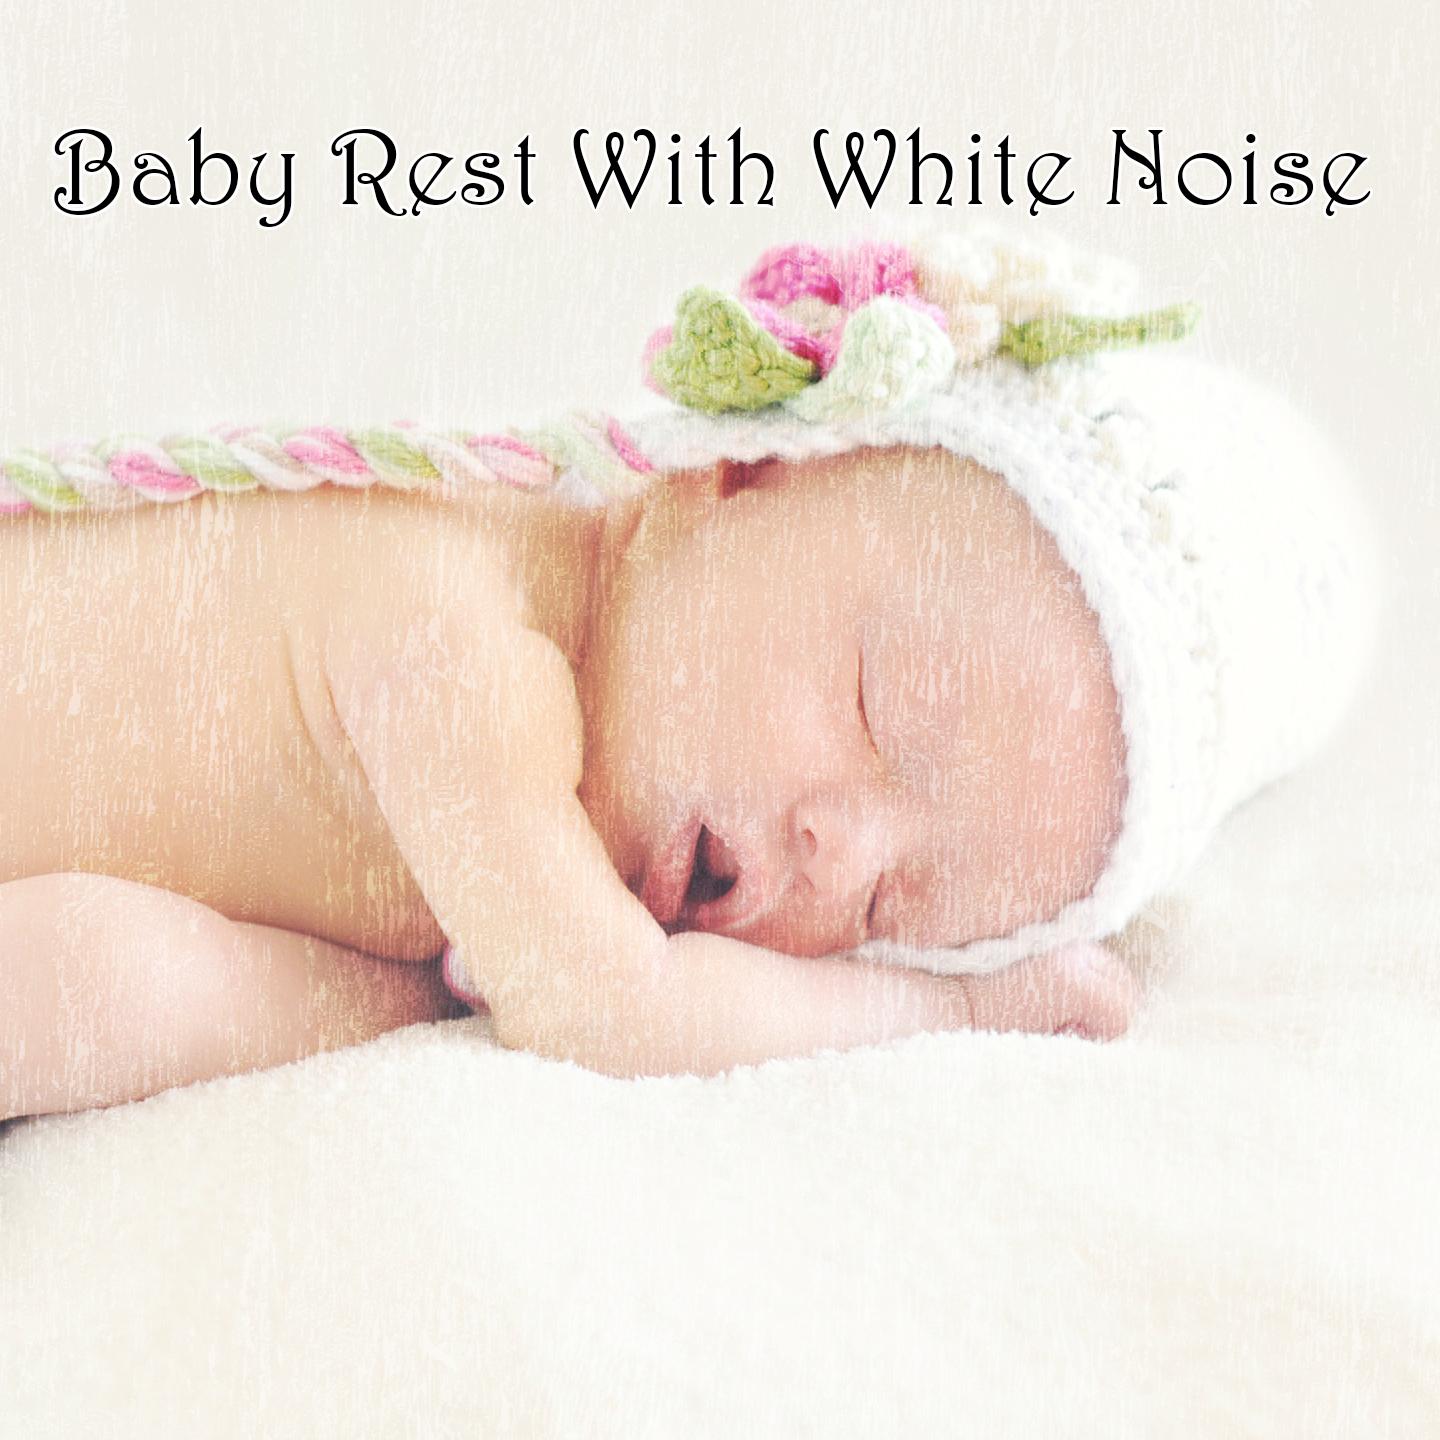 Baby Rest With White Noise